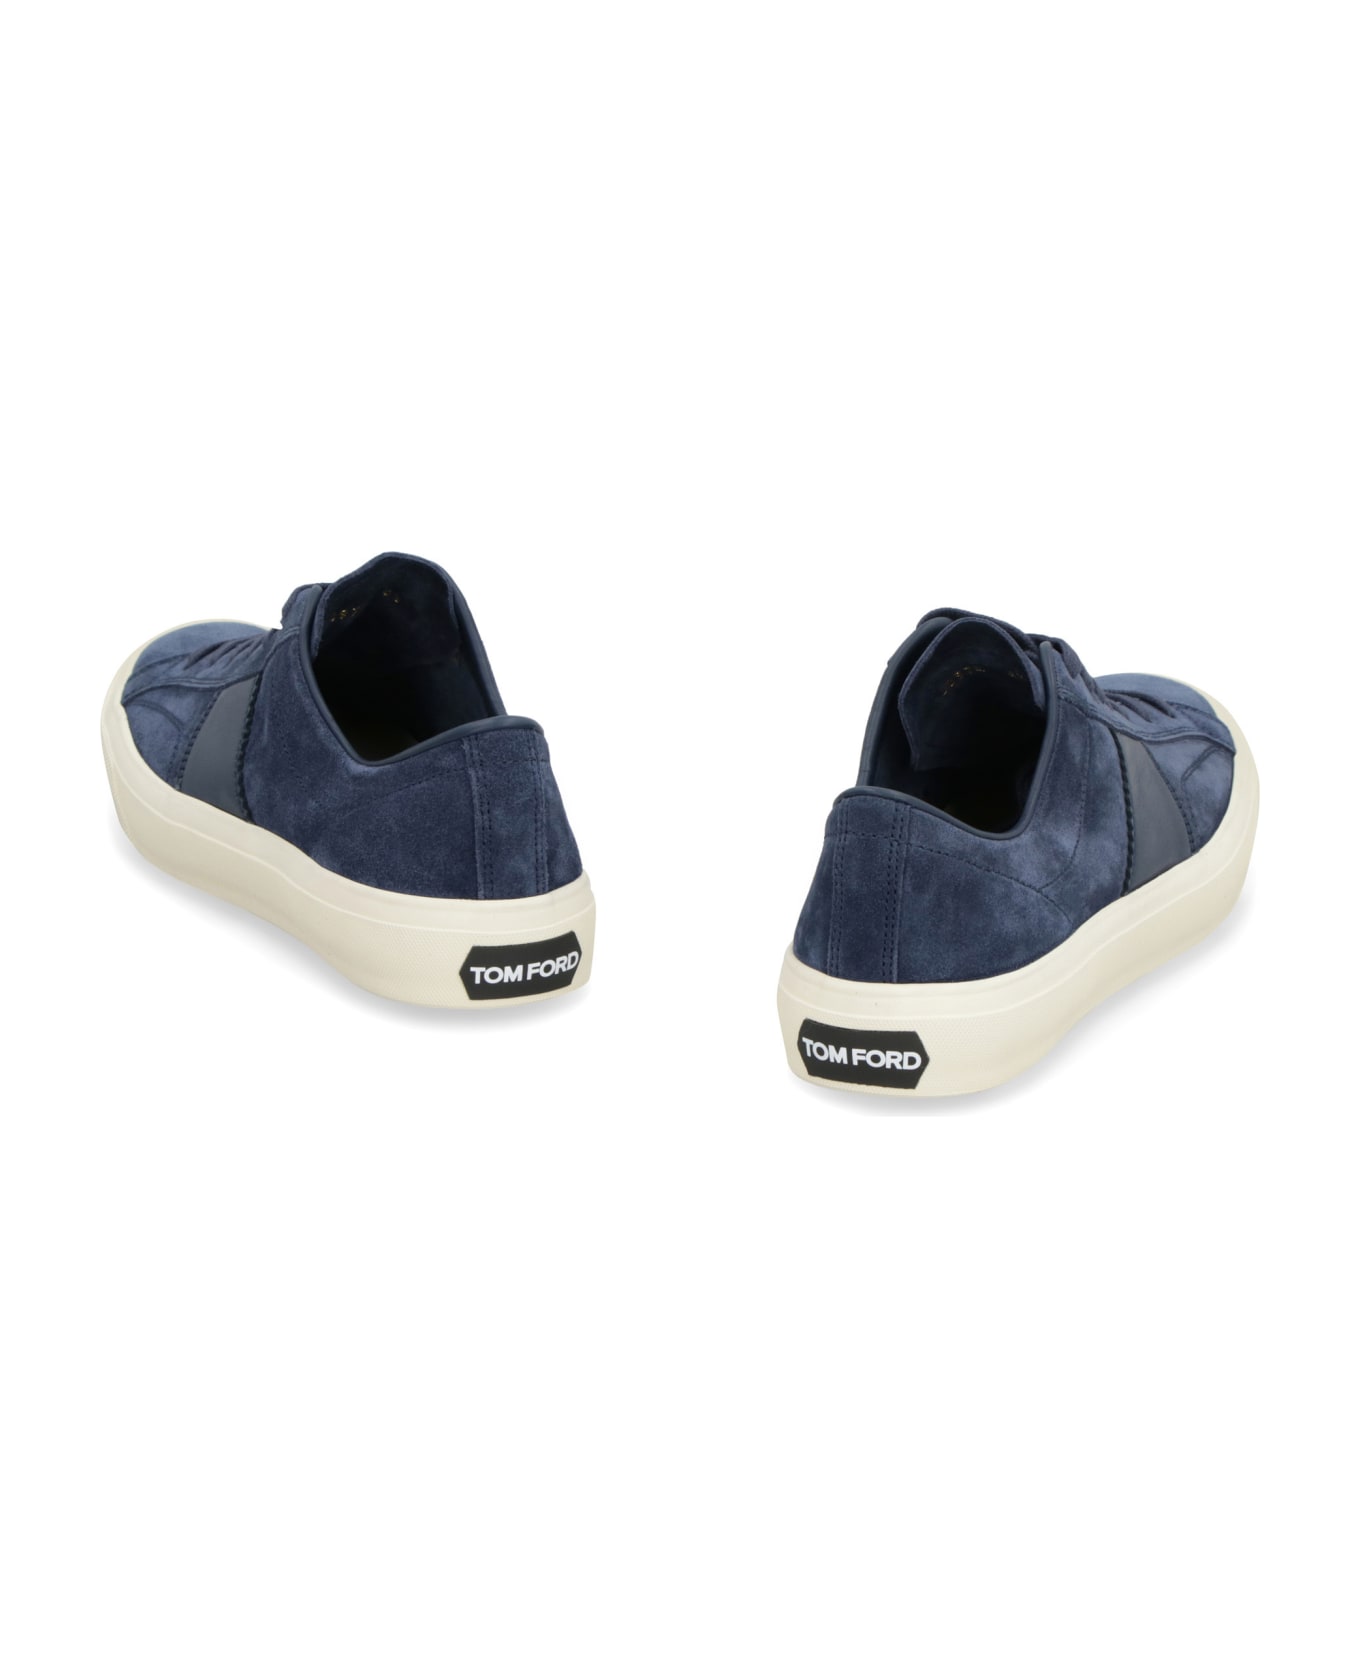 Tom Ford Cambridge Suede Sneakers - blue